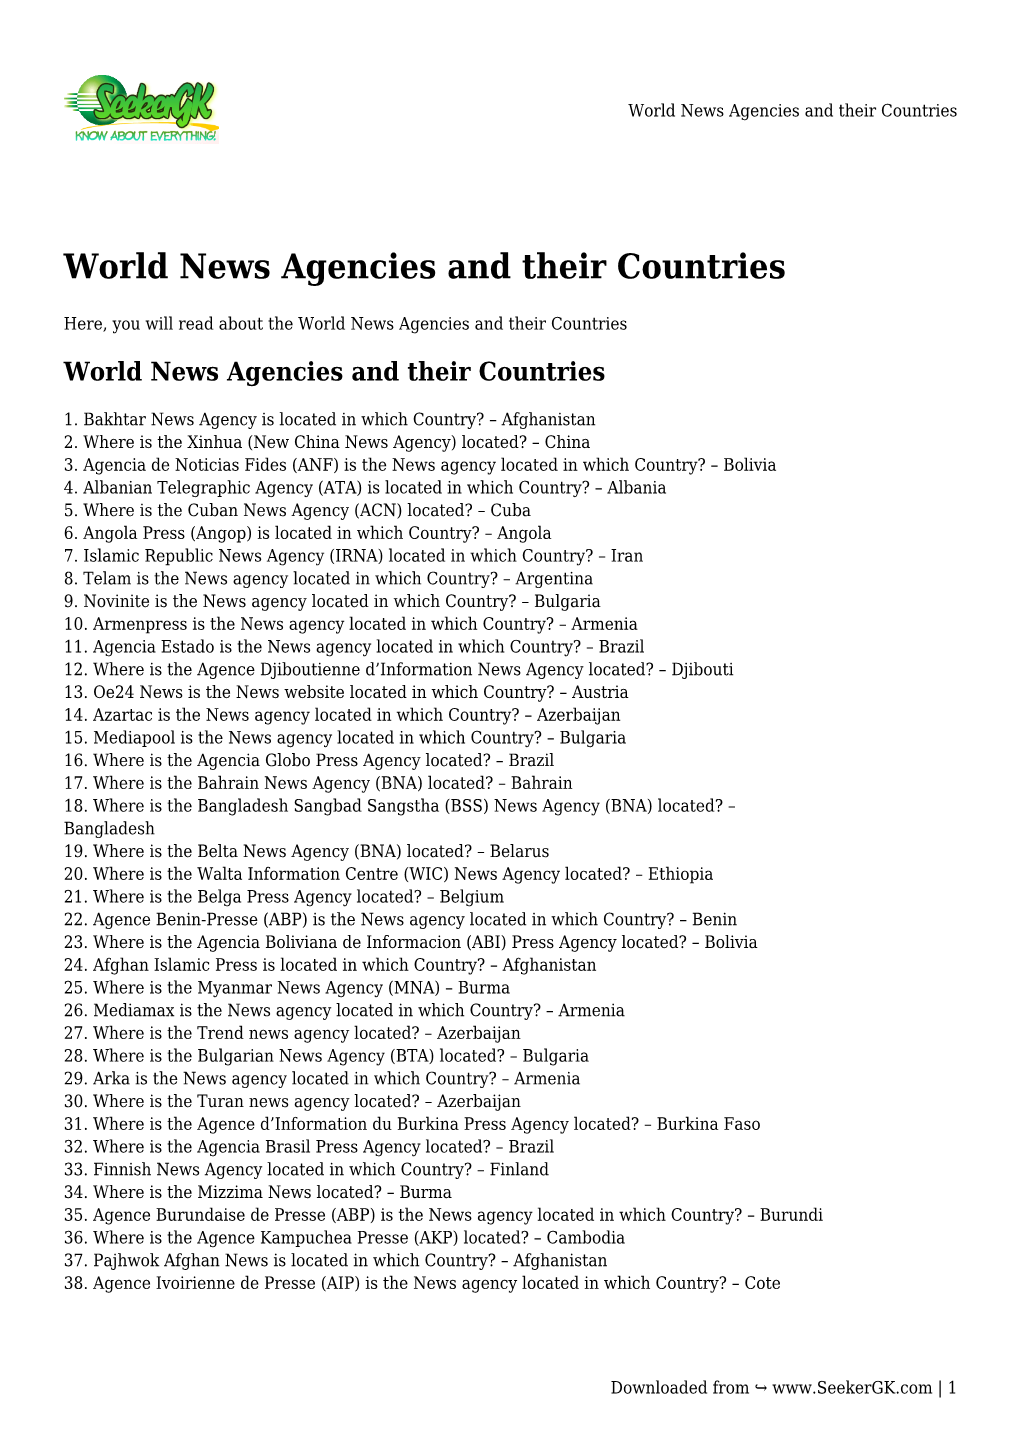 World News Agencies and Their Countries